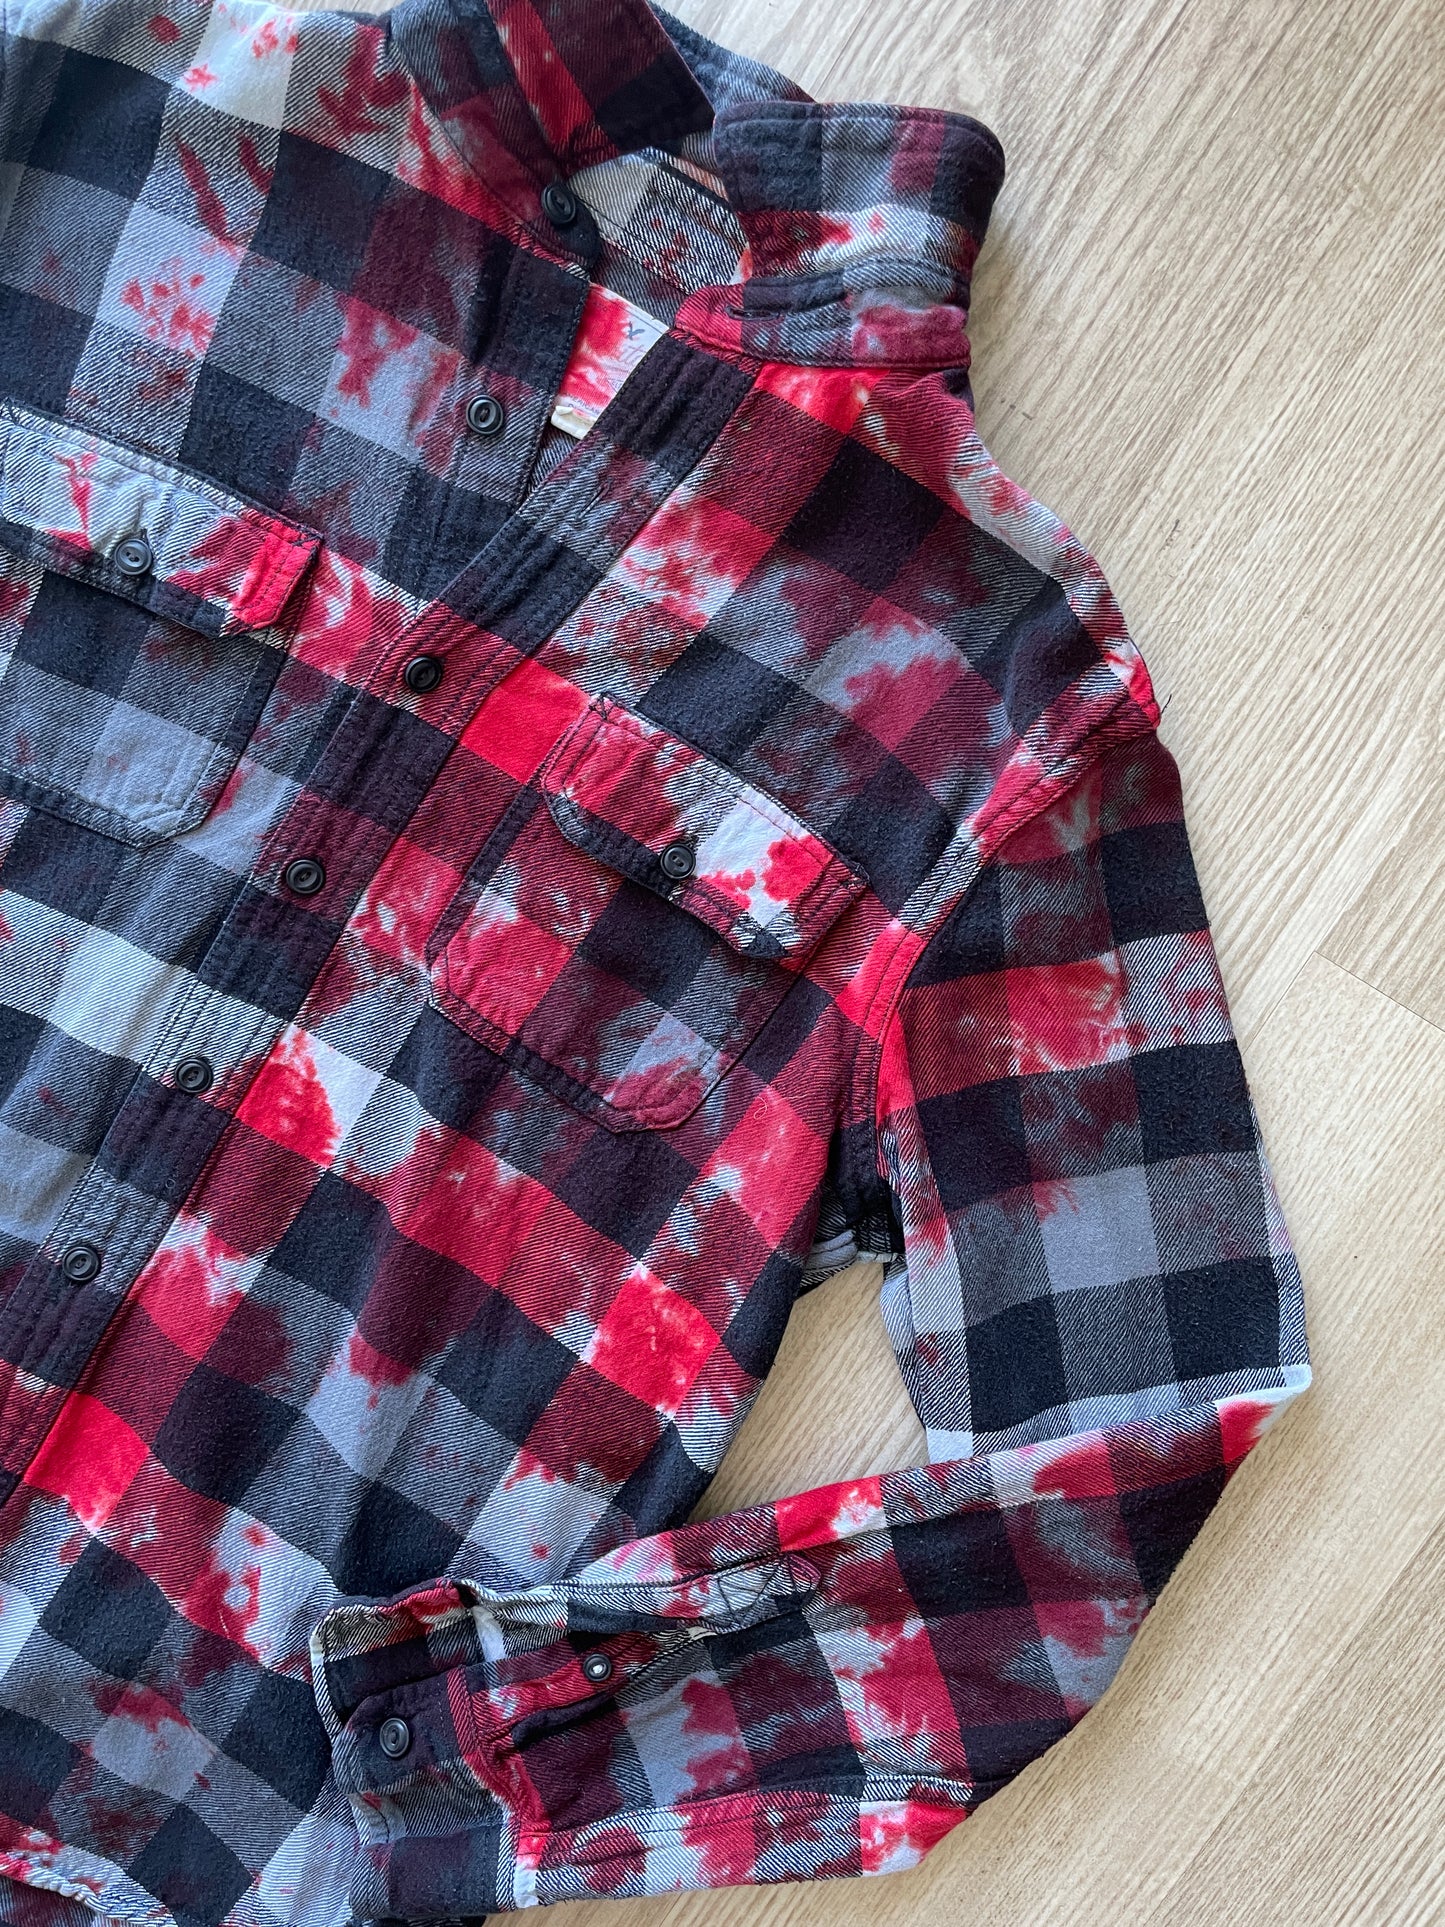 MEDIUM Men’s American Eagle Black, White, and Red Handmade Tie Dye Flannel Shirt | One-Of-a-Kind Upcycled Long Sleeve